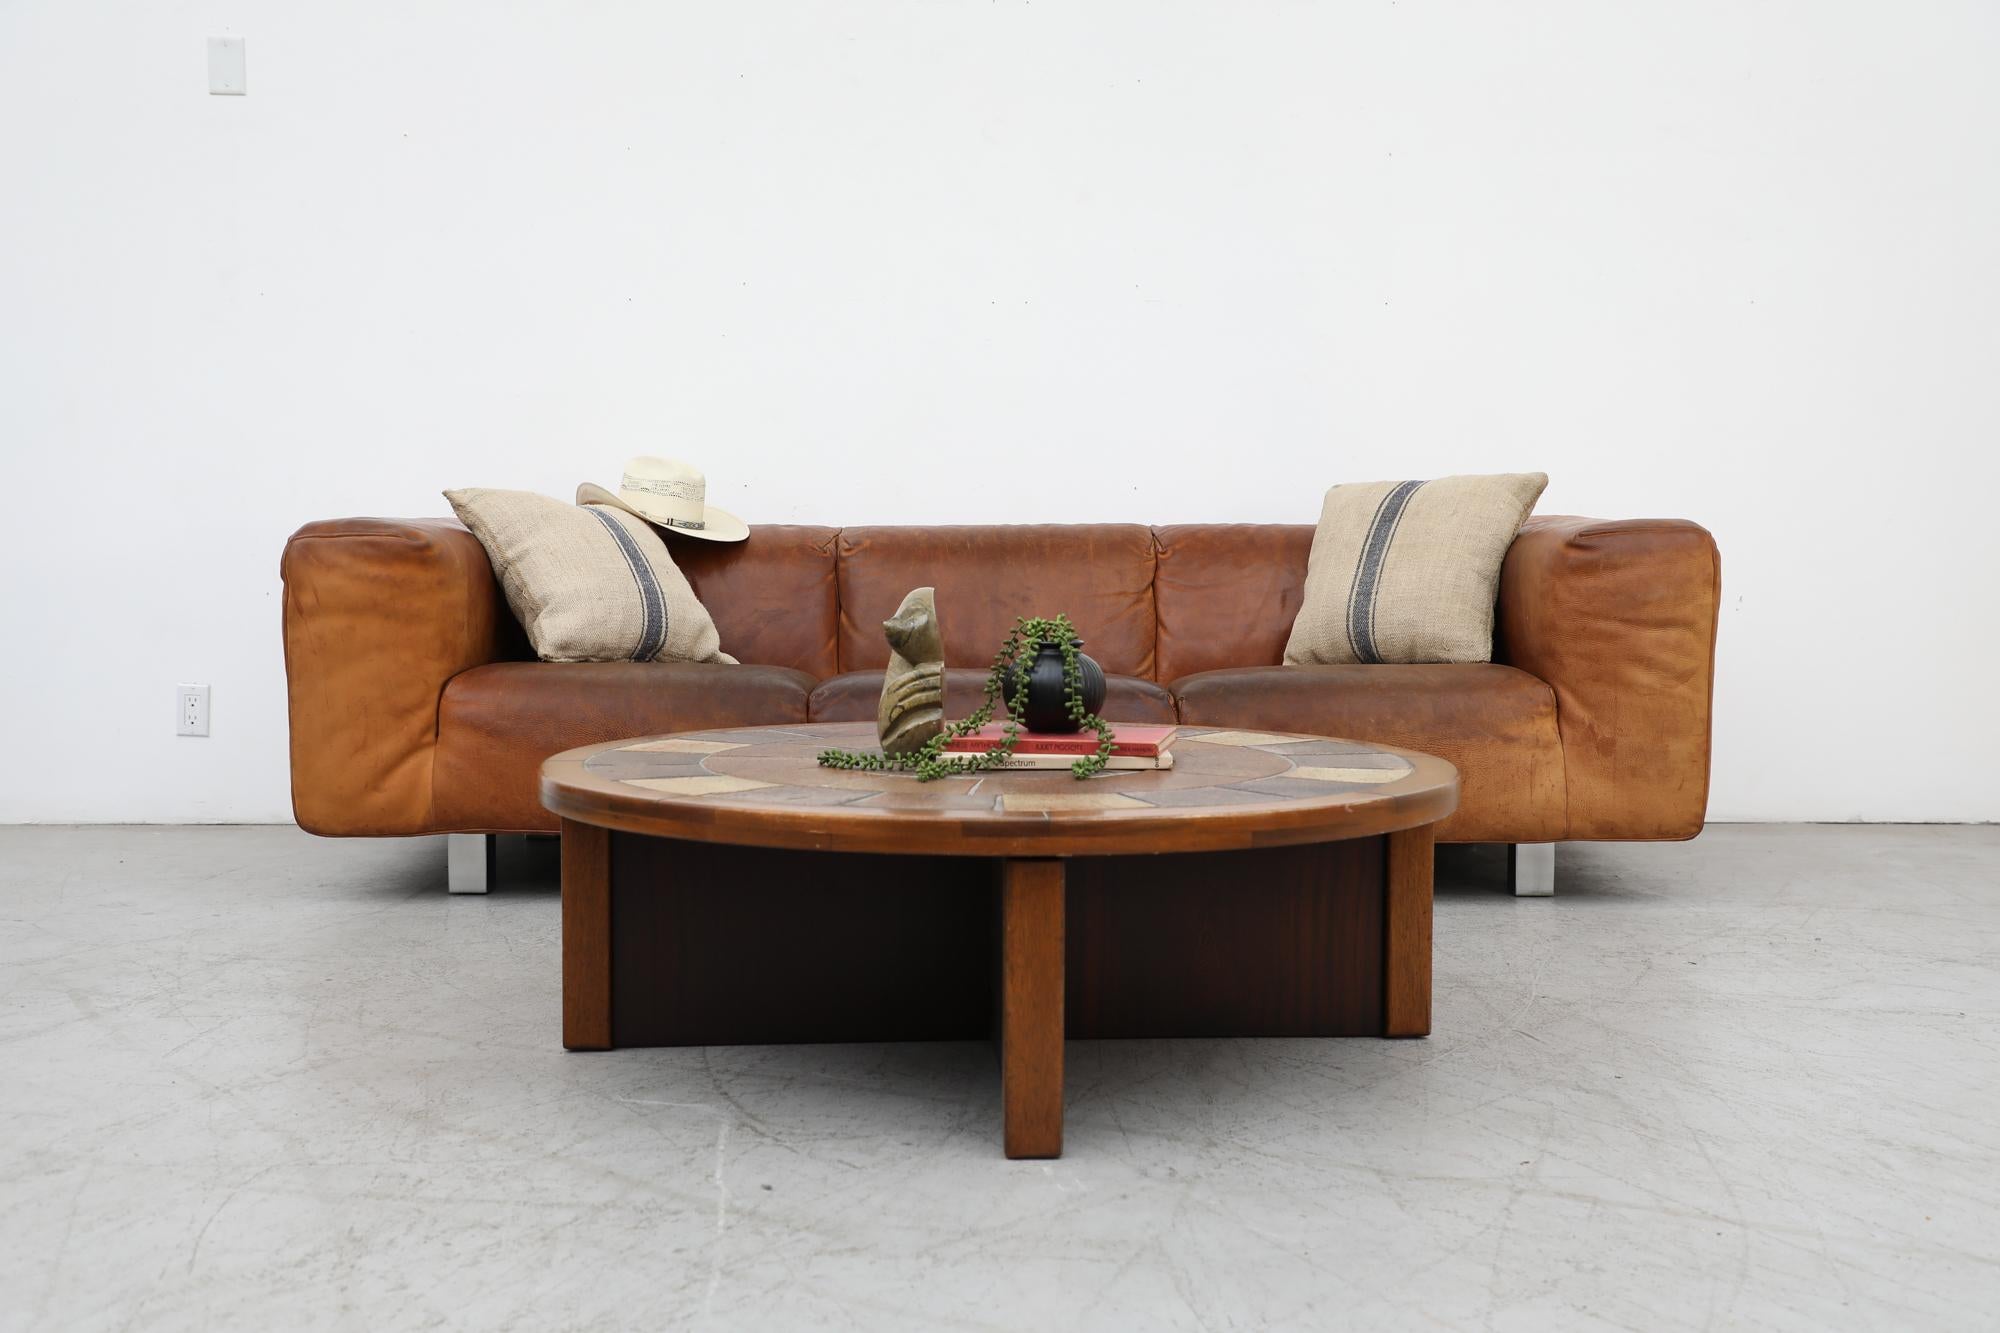 Handsome 1980s Gerard van den Berg Leather Sofa for Montis. Thick cognac toned leather with visible patina and some visible wear consistent with age and casual use. Sofa underlining has small tear patched by previous owner but otherwise original